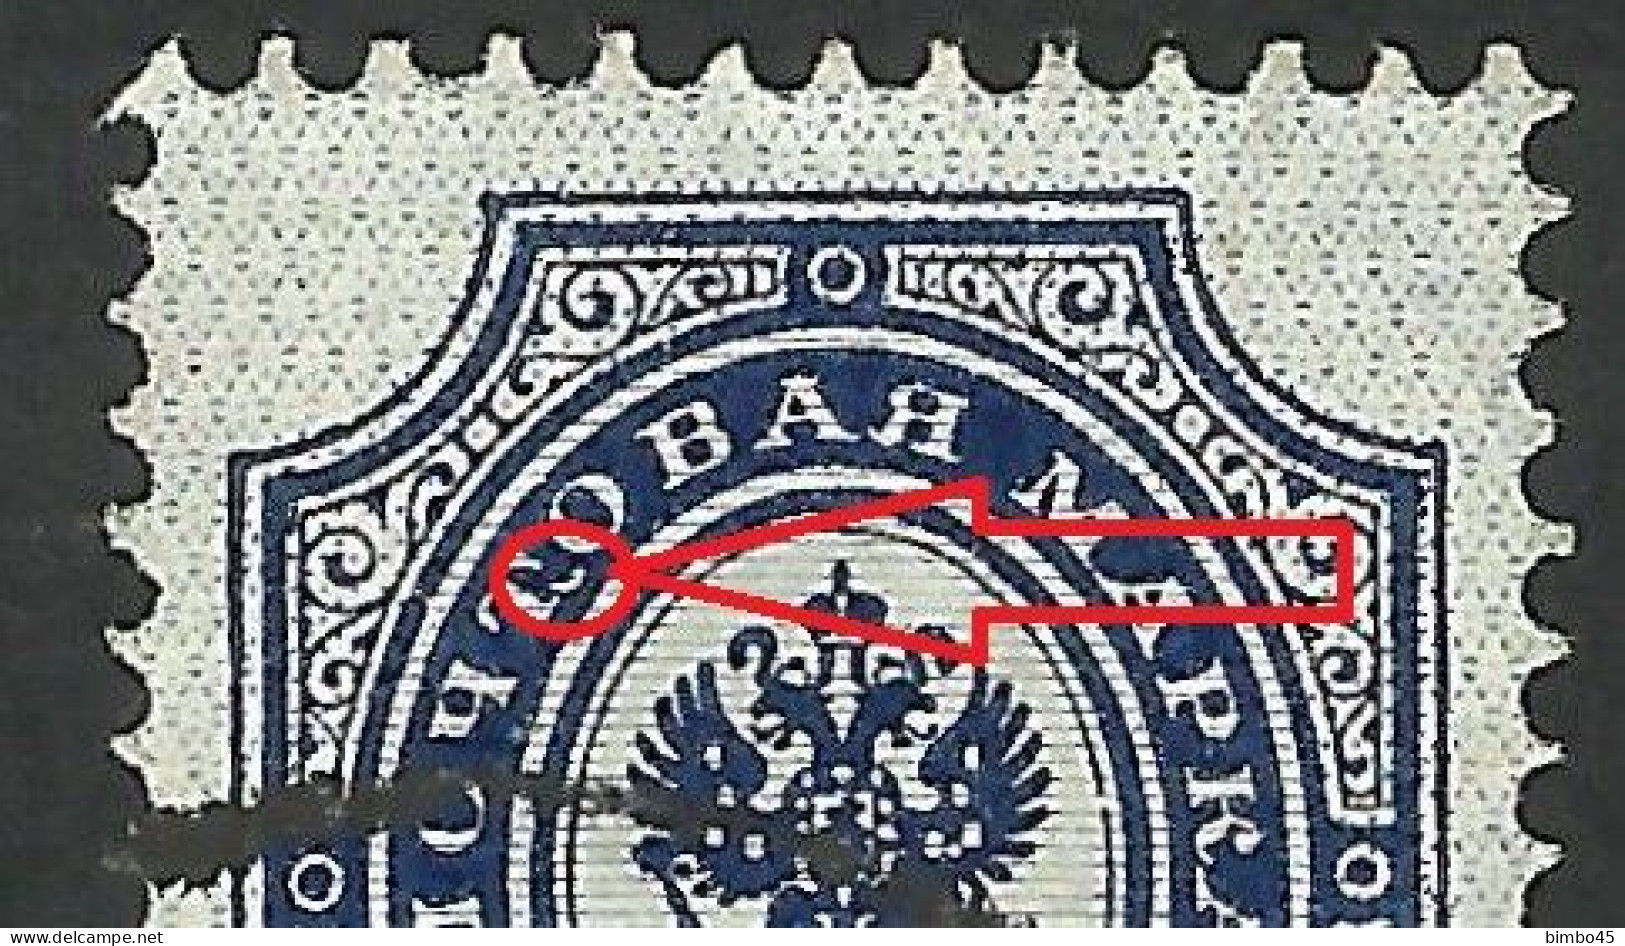 Error  Russia  1889 --- Rar -- Comma Between The Letter "T" And "O" - Errors & Oddities